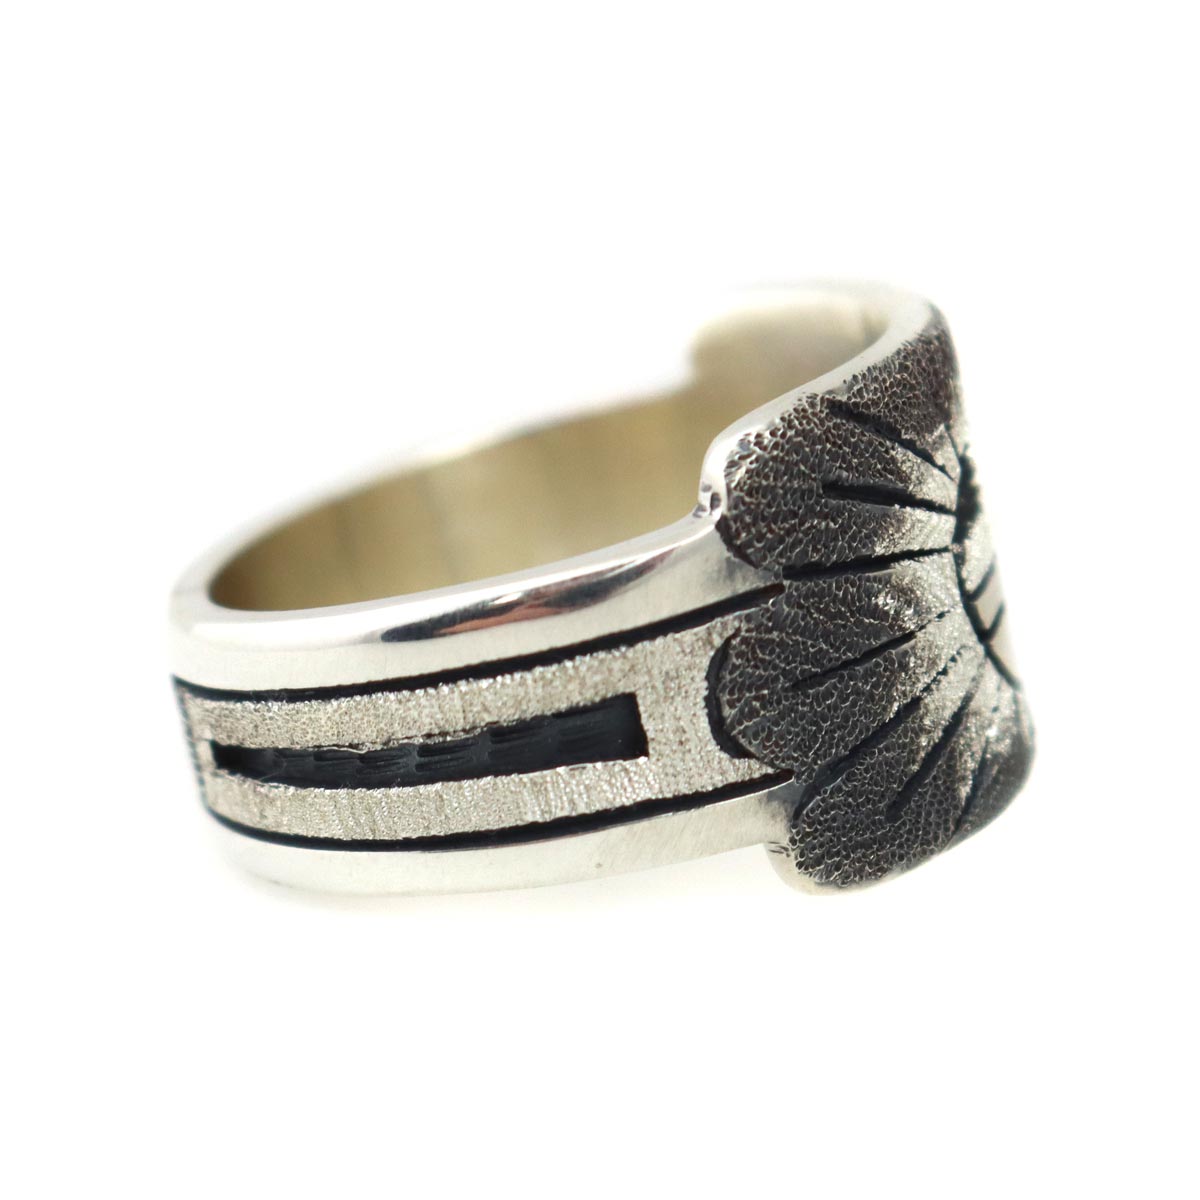 Ronald Wadsworth - Hopi Contemporary Sterling Silver Overlay Ring with Sunface Kachina Design, size 8 (J14777) 1
